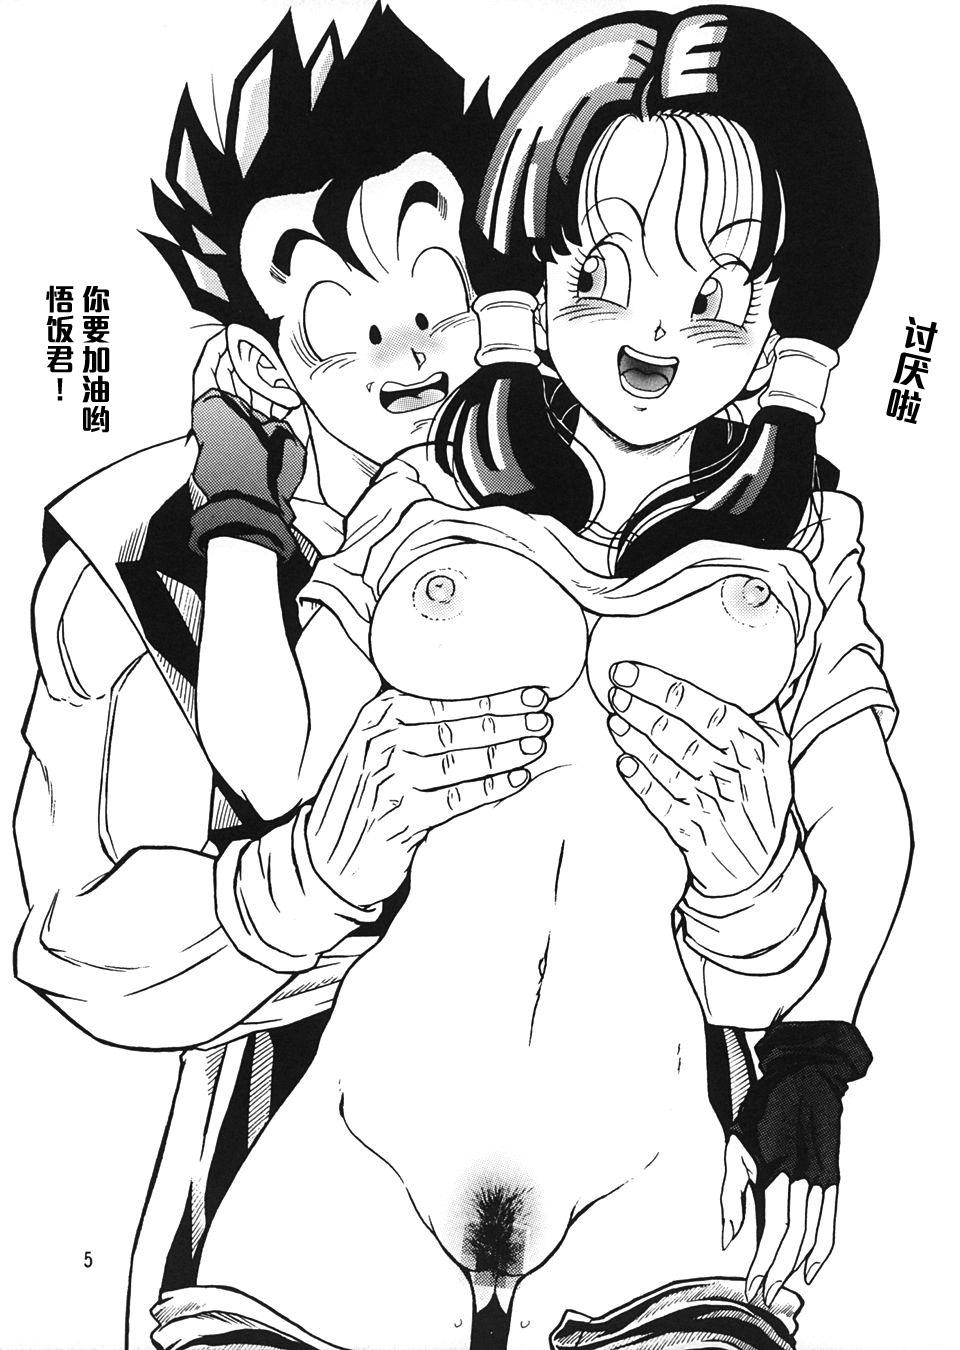 Speculum DRAGONBALL H - Dragon ball z Culos - Page 4